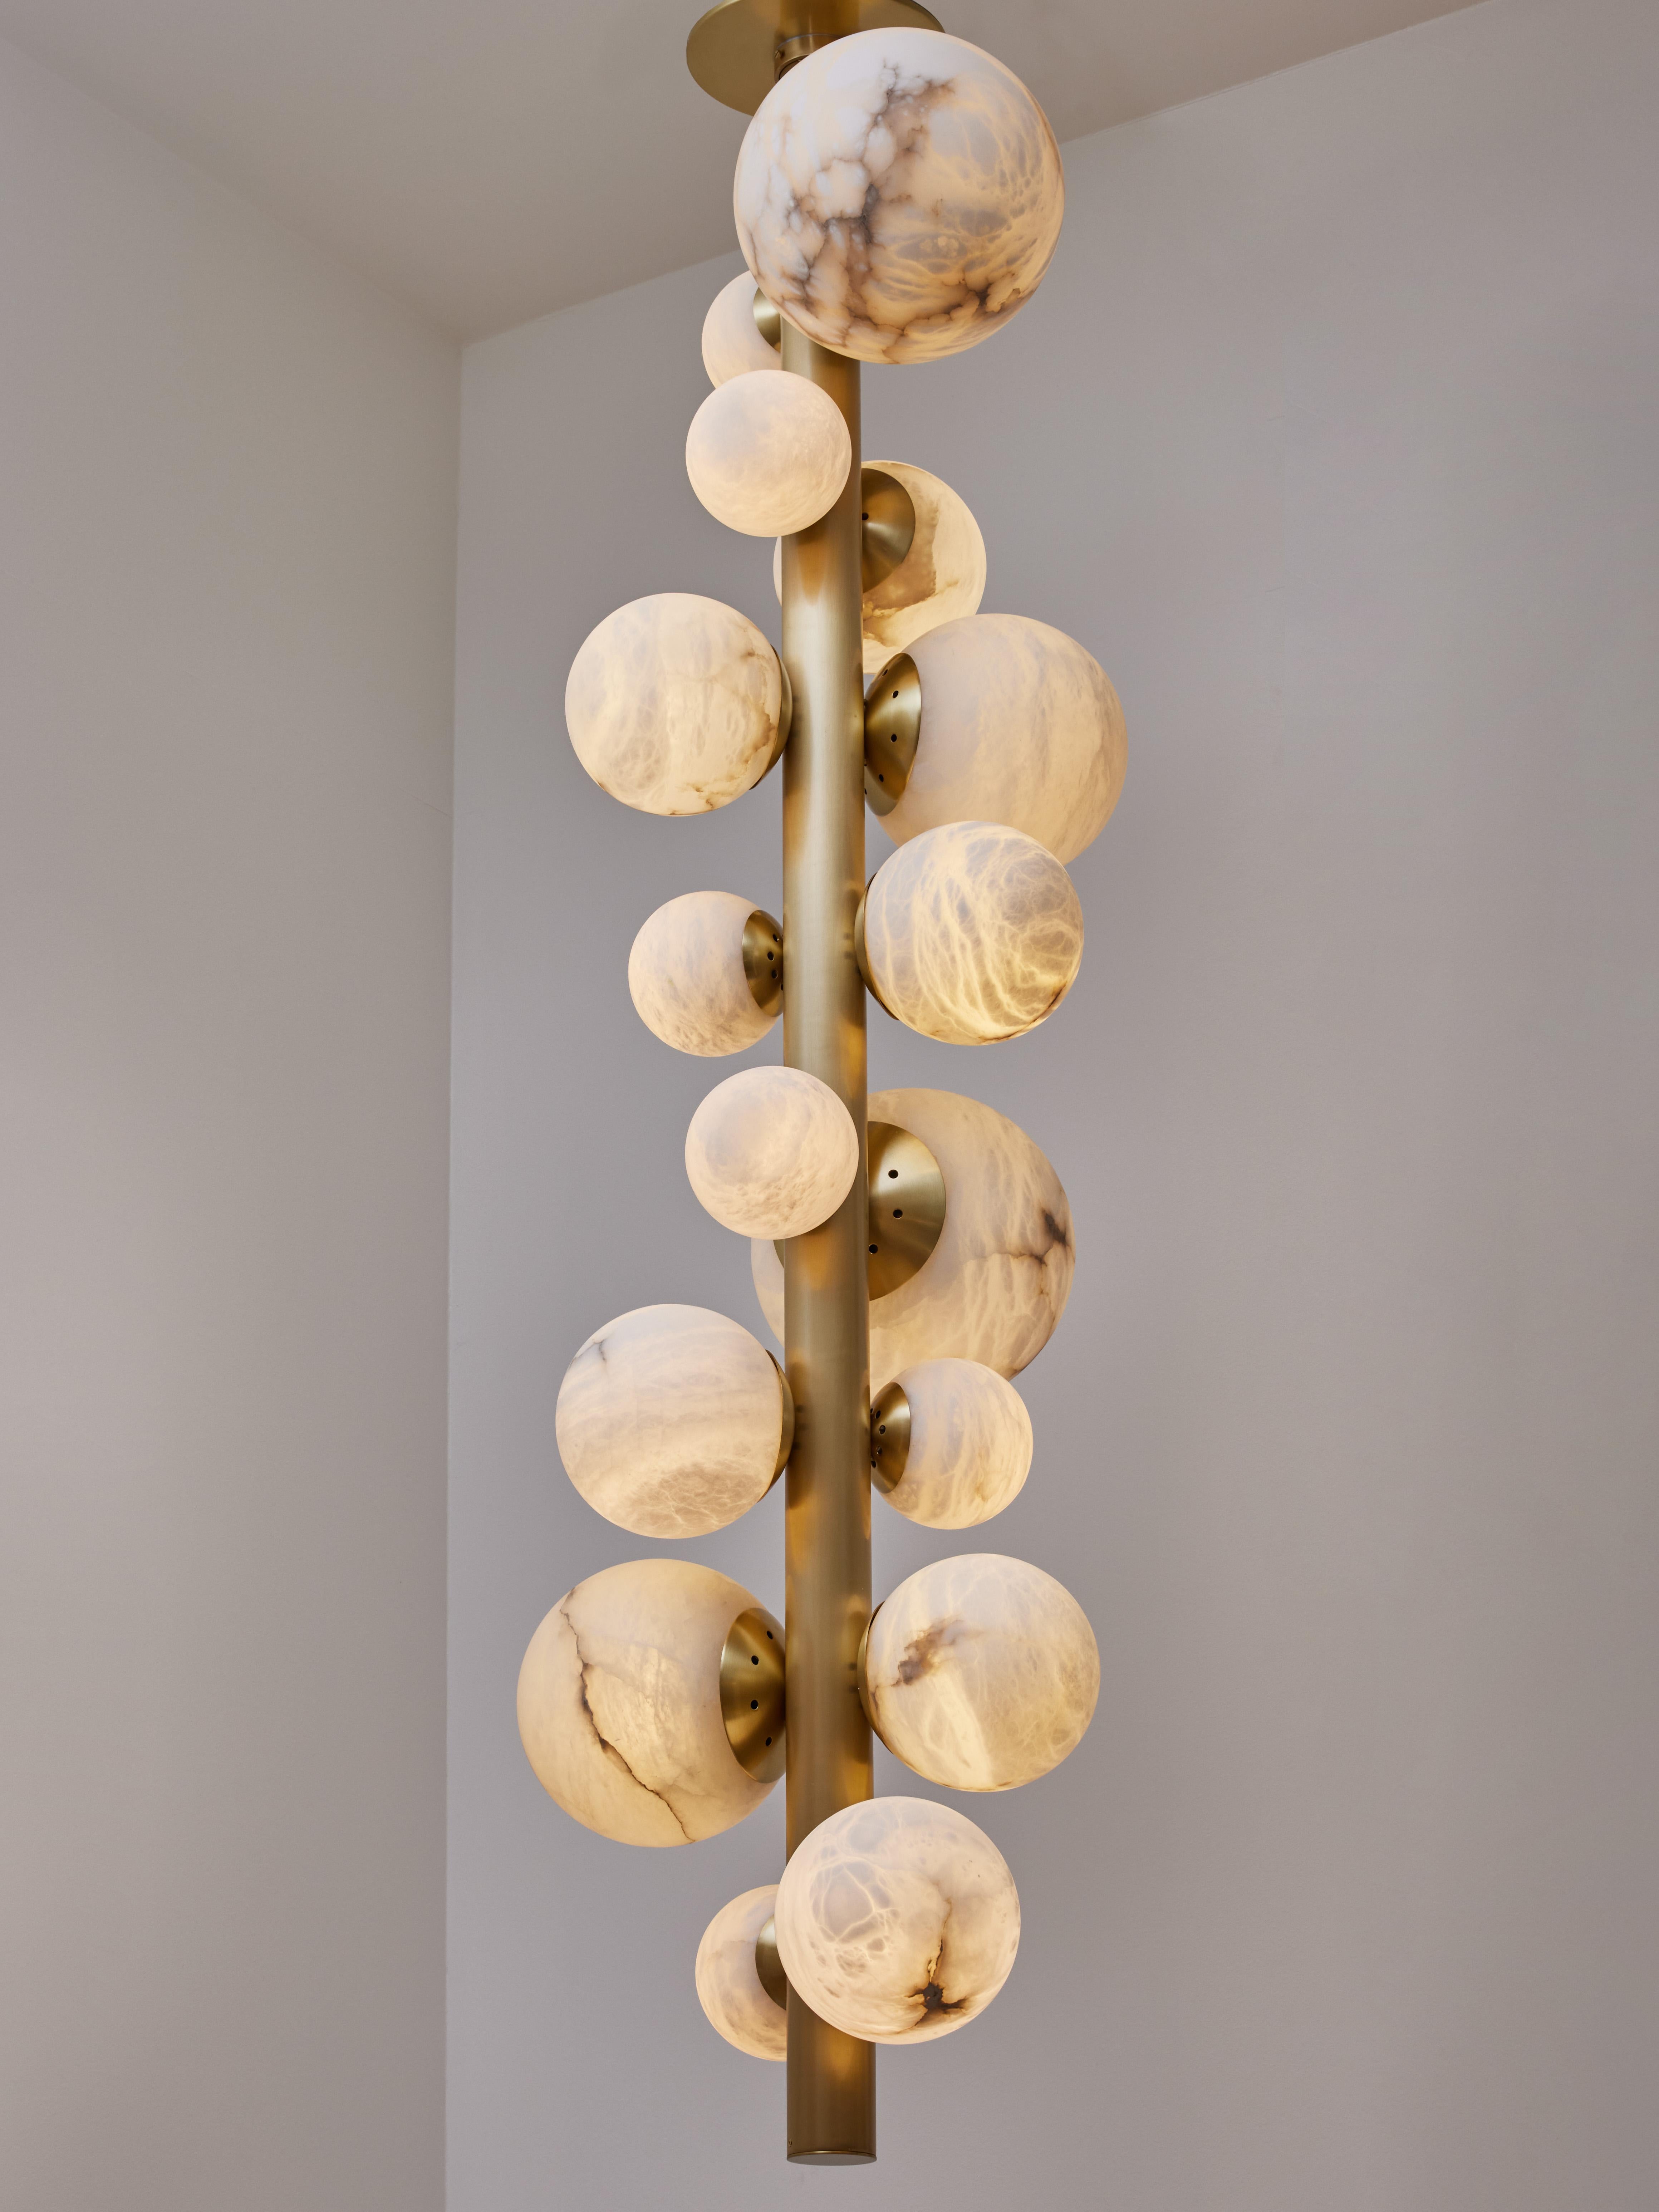 New design by Glustin Luminaires, following our works with alabaster, we offer this new variation made of a vertical brass stem which supports various sized enlightened alabaster globes.